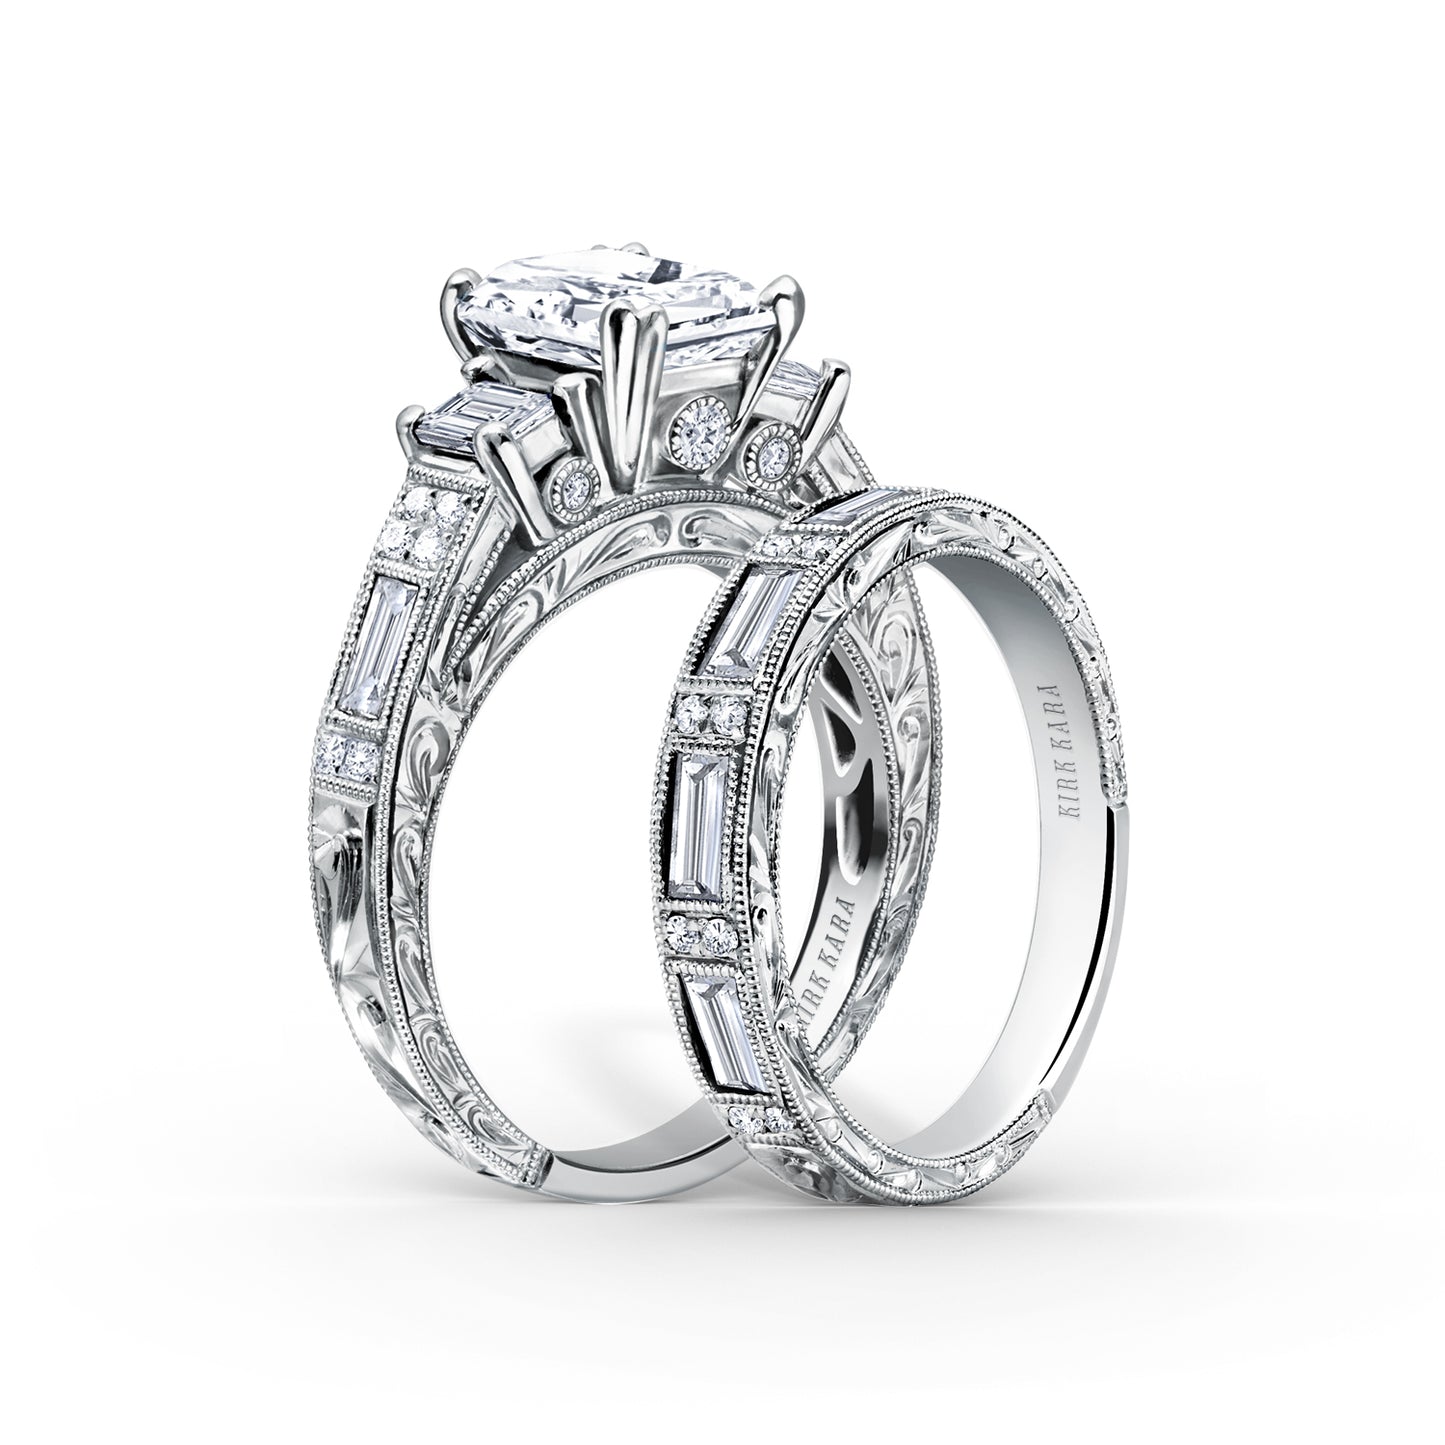 Deco Three Stone Engraved Baguette Diamond Engagement Ring